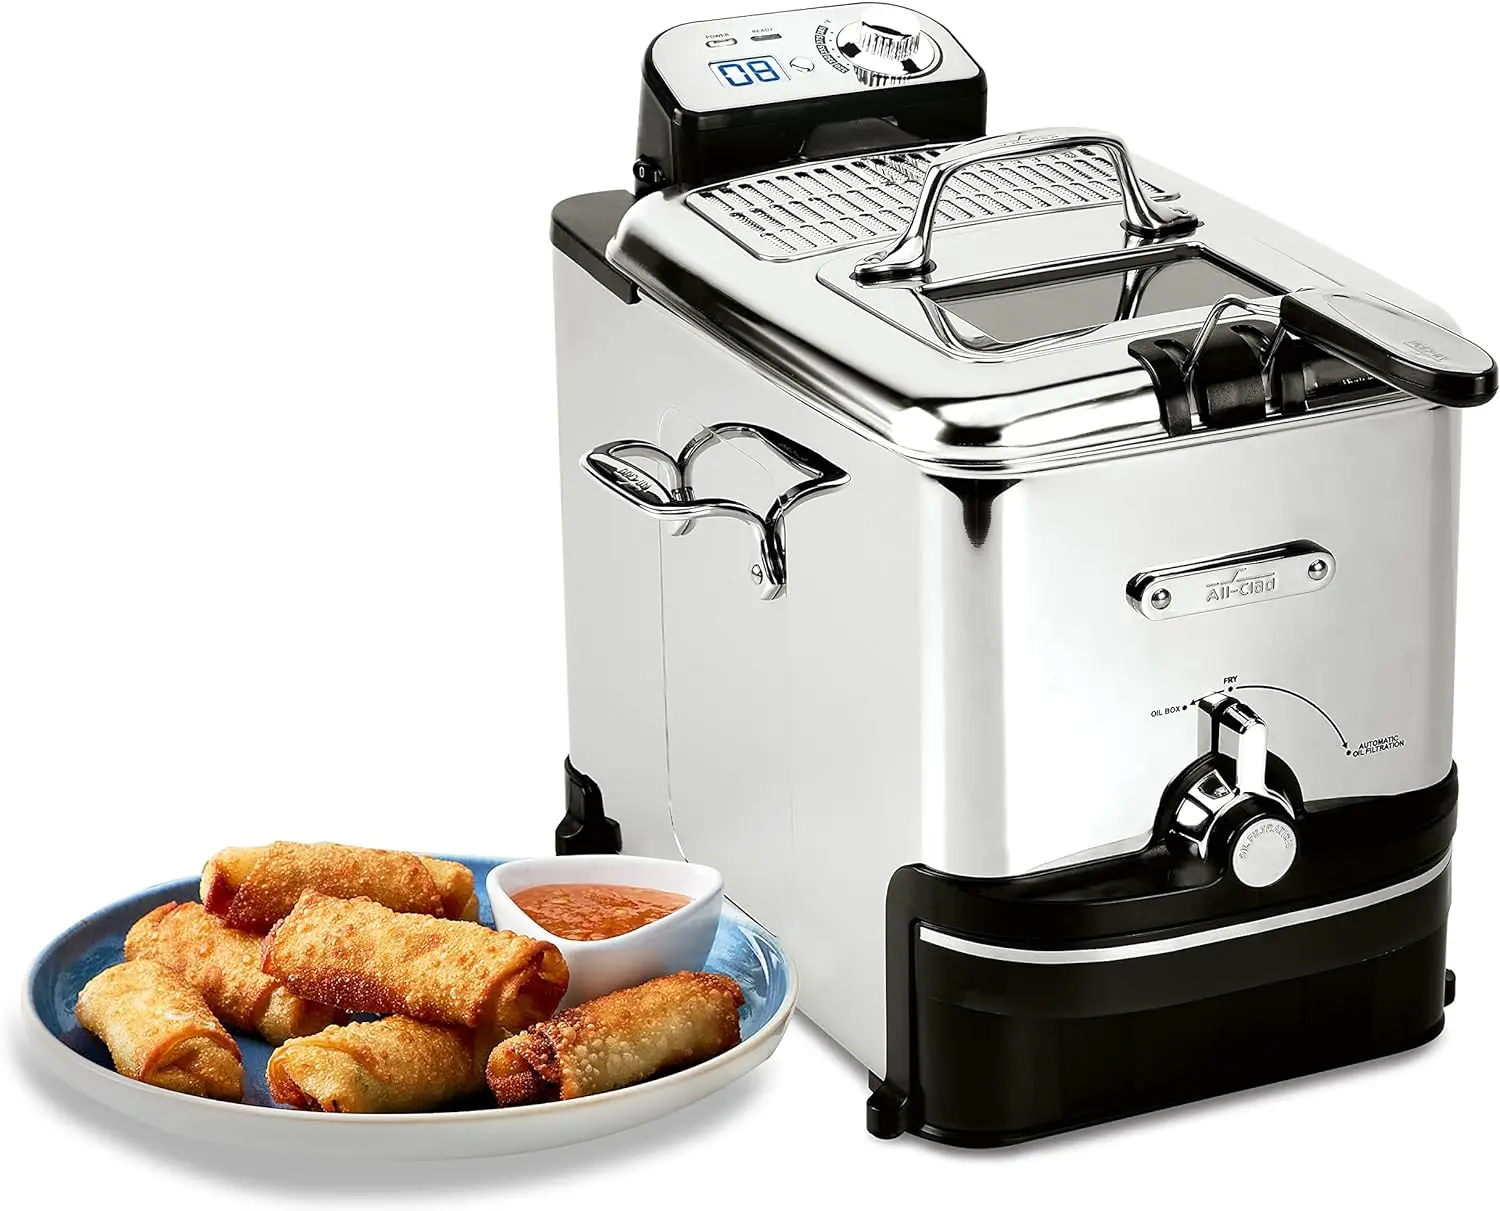 

All-Clad Electrics Stainless Steel Deep Fryer with Basket 3.5 Liter Oil Capacity, 2.6 Pound Food Capacity 1700 Watts Dishwasher